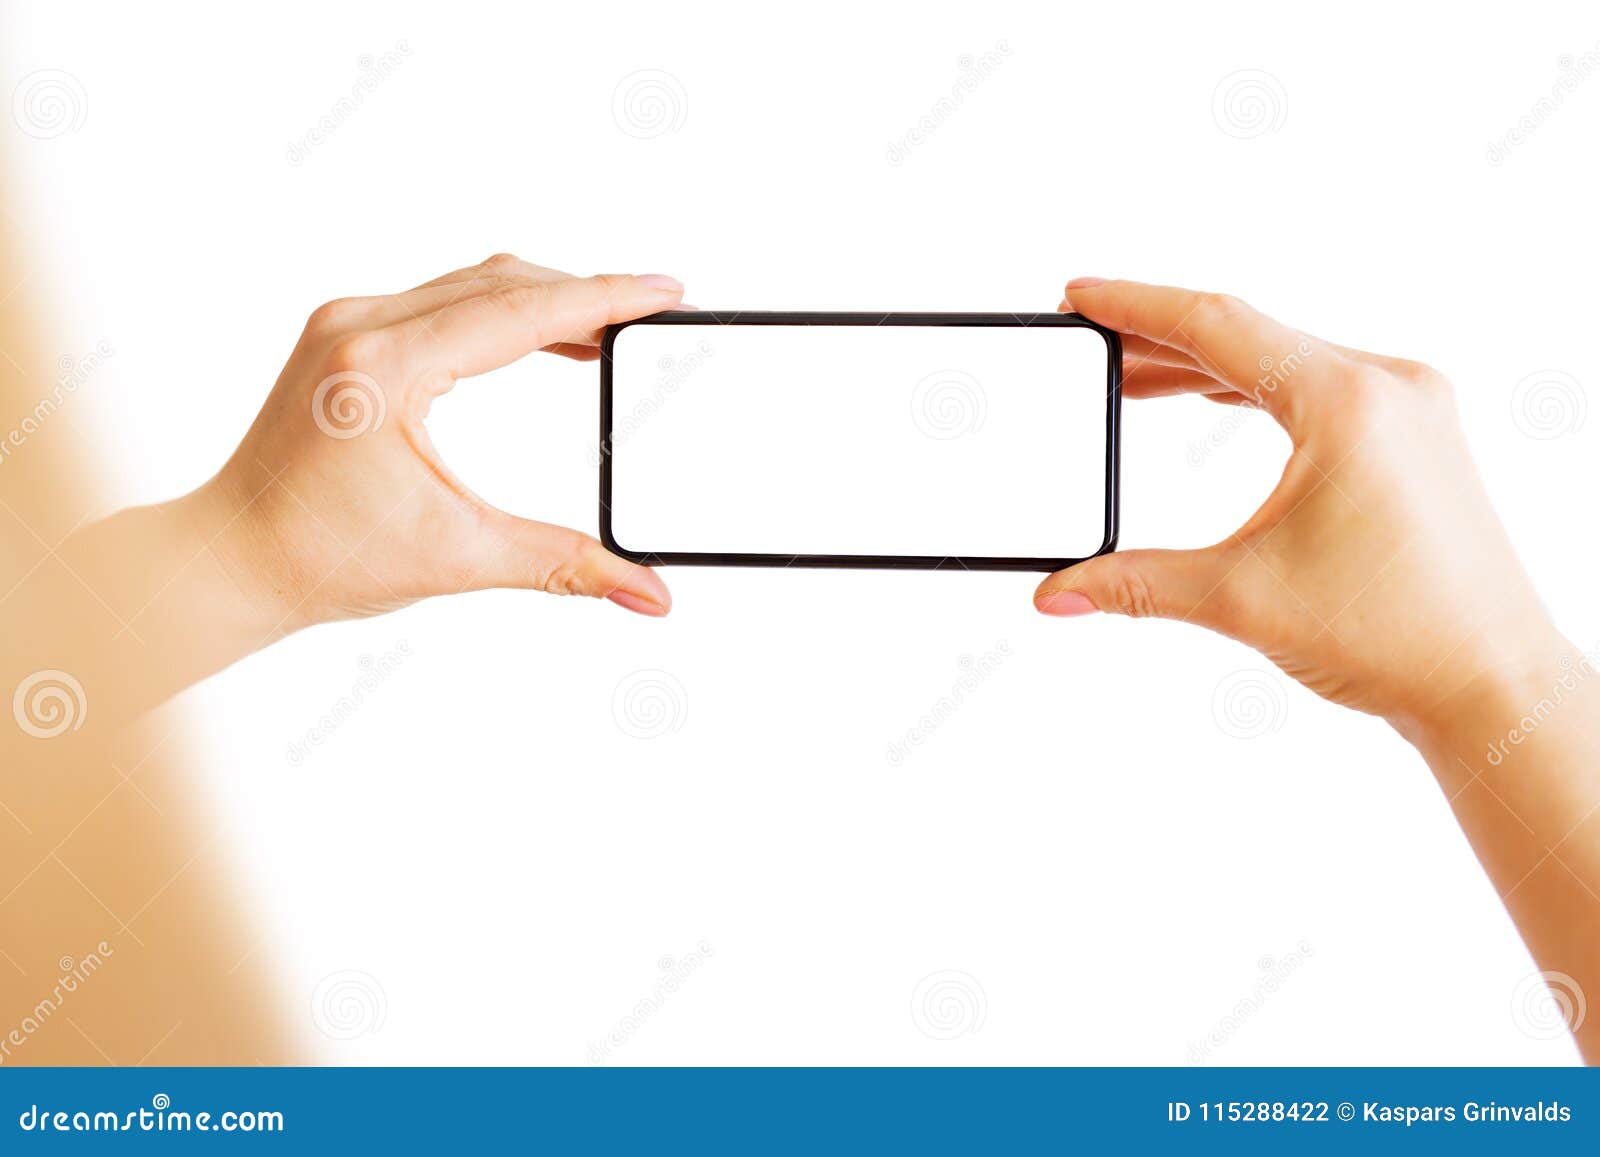 person taking photo with phone.  on white.